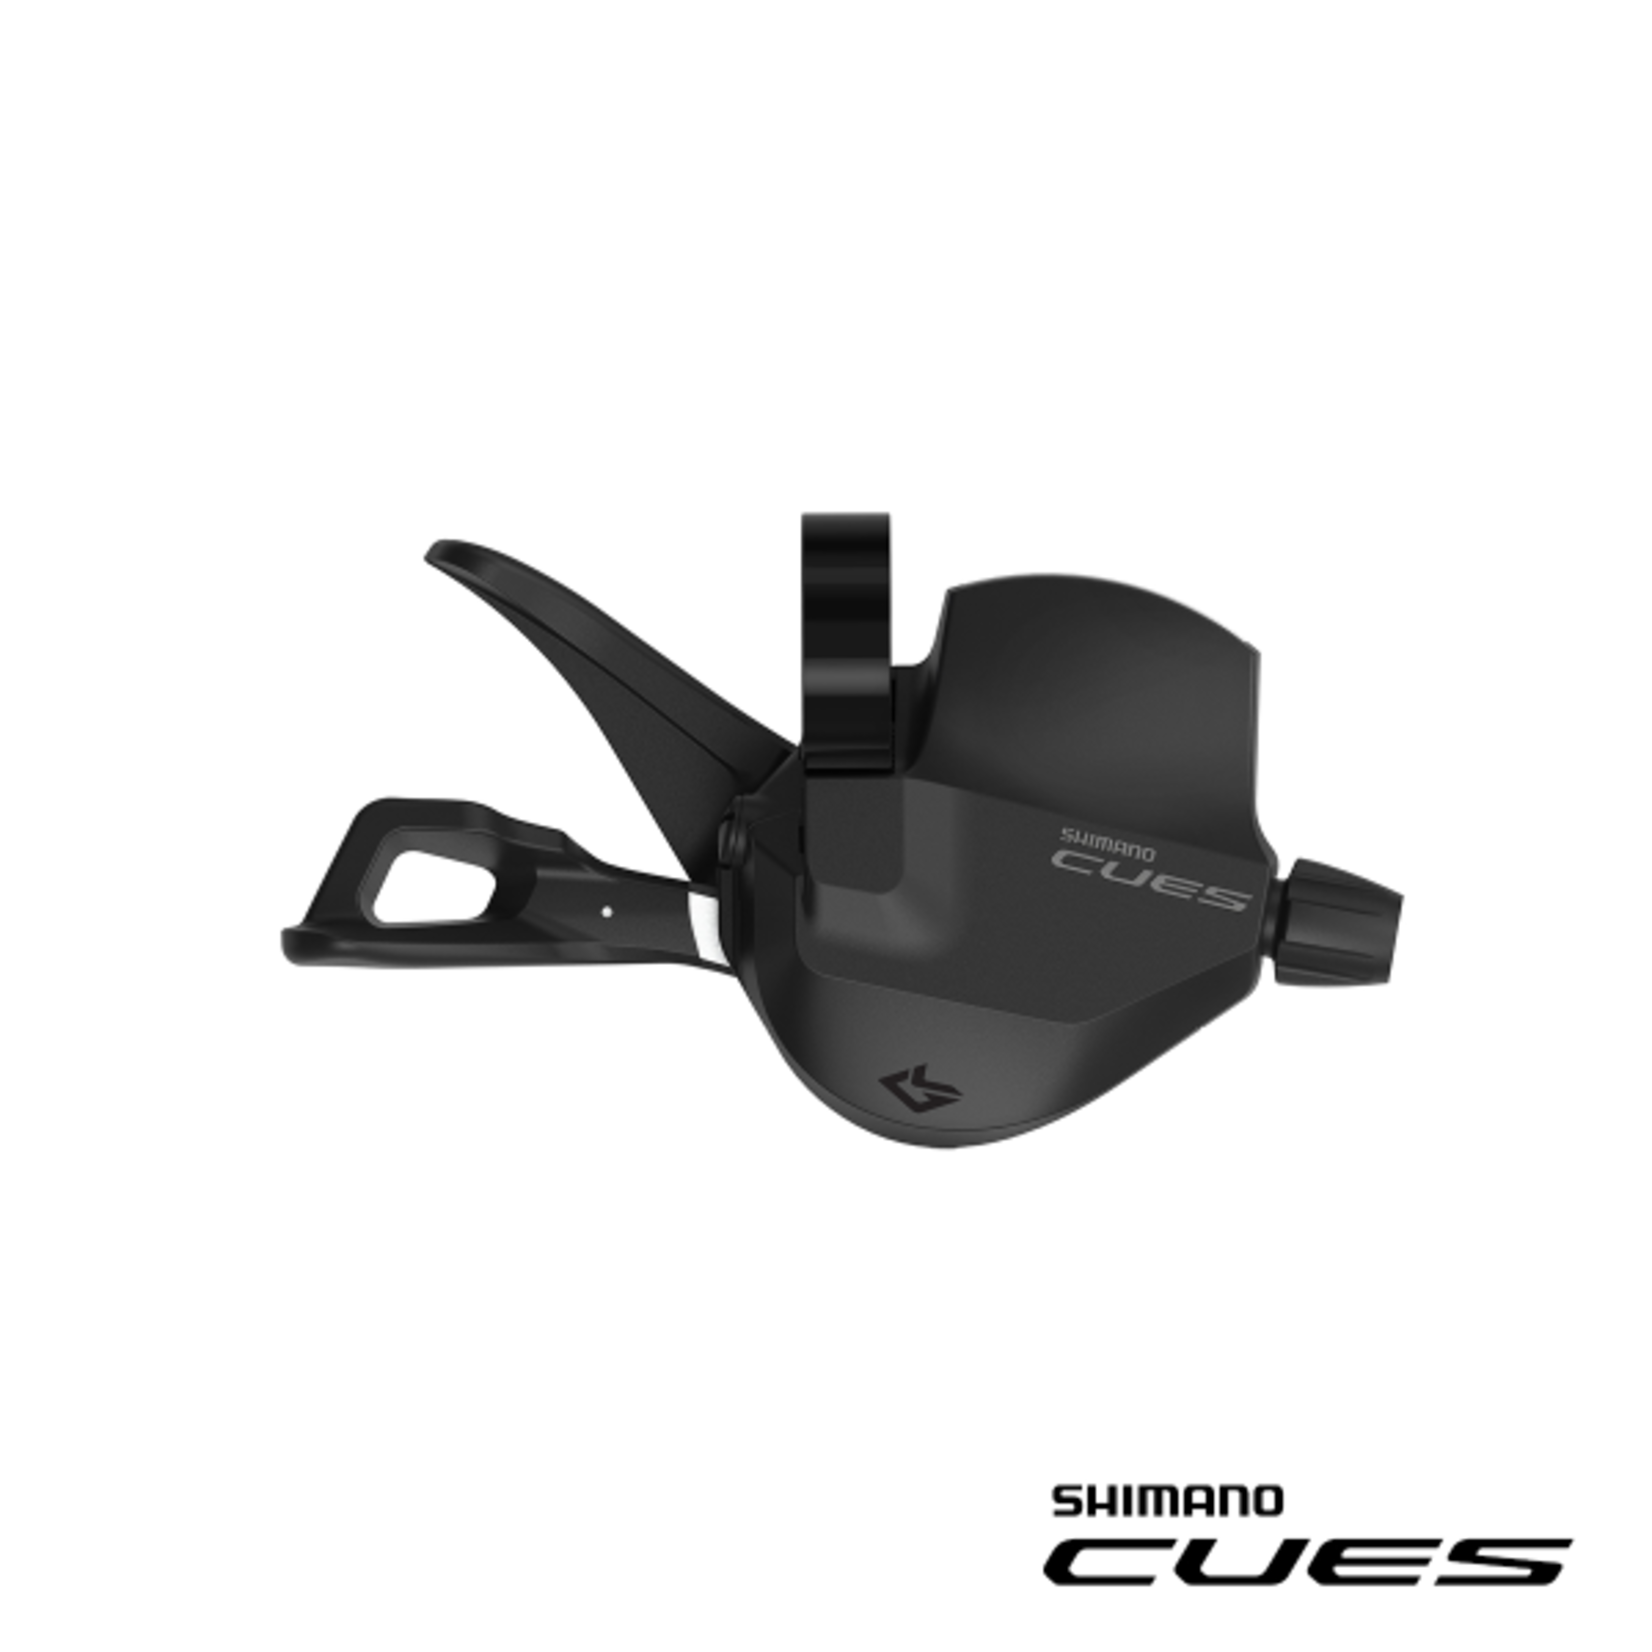 Shimano SL-U4010 SHIFT LEVER - RIGHT CUES 9-SPEED